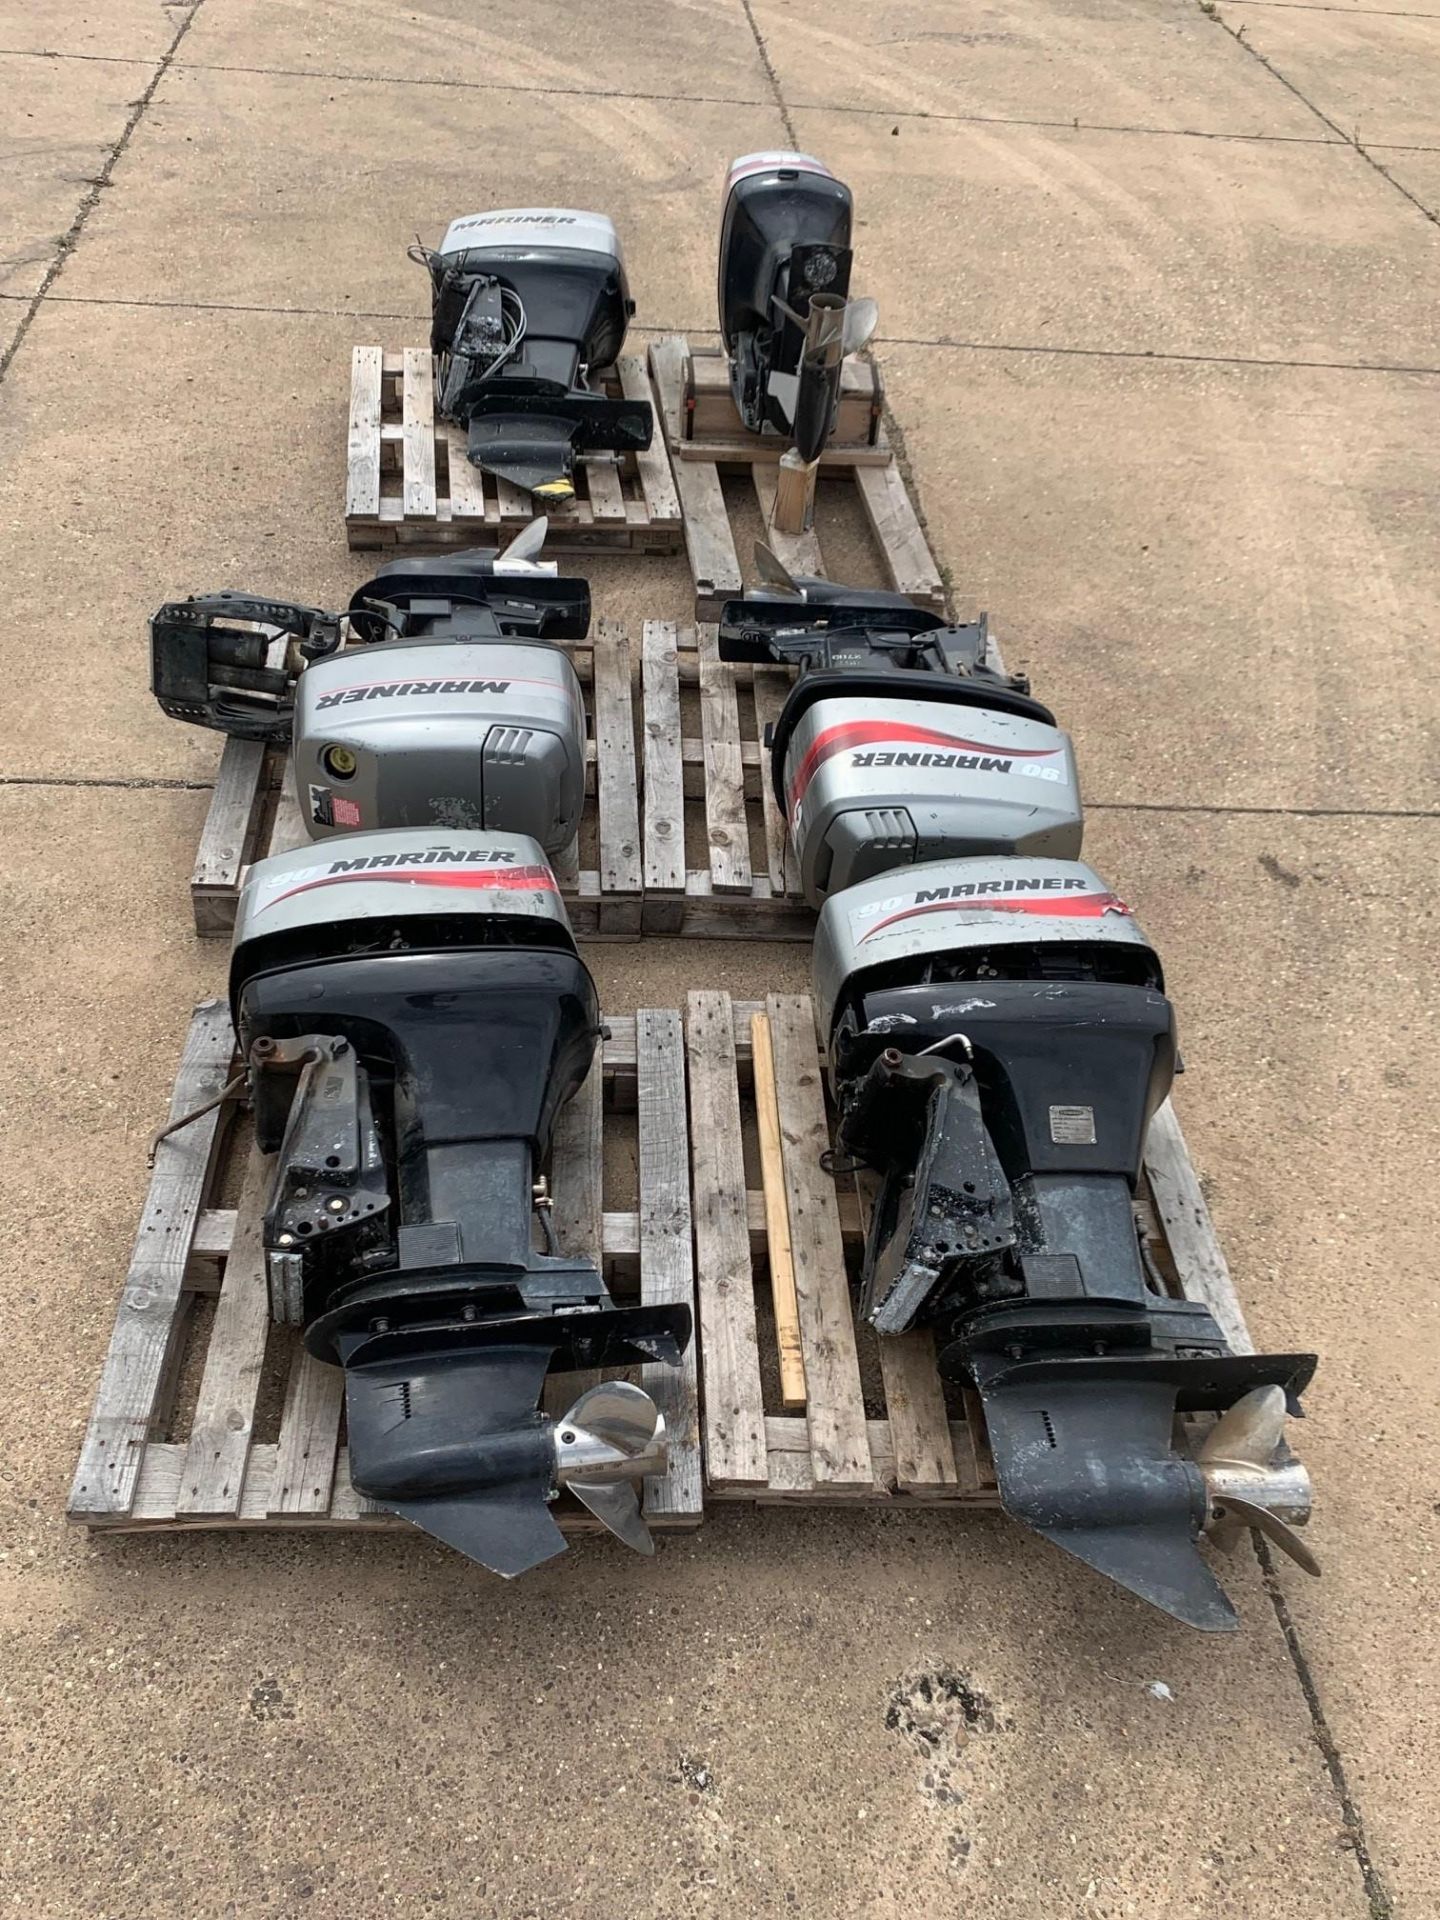 Qty 6 Mariner 90hp Outboard Motors Ex Mod used - Image 2 of 14